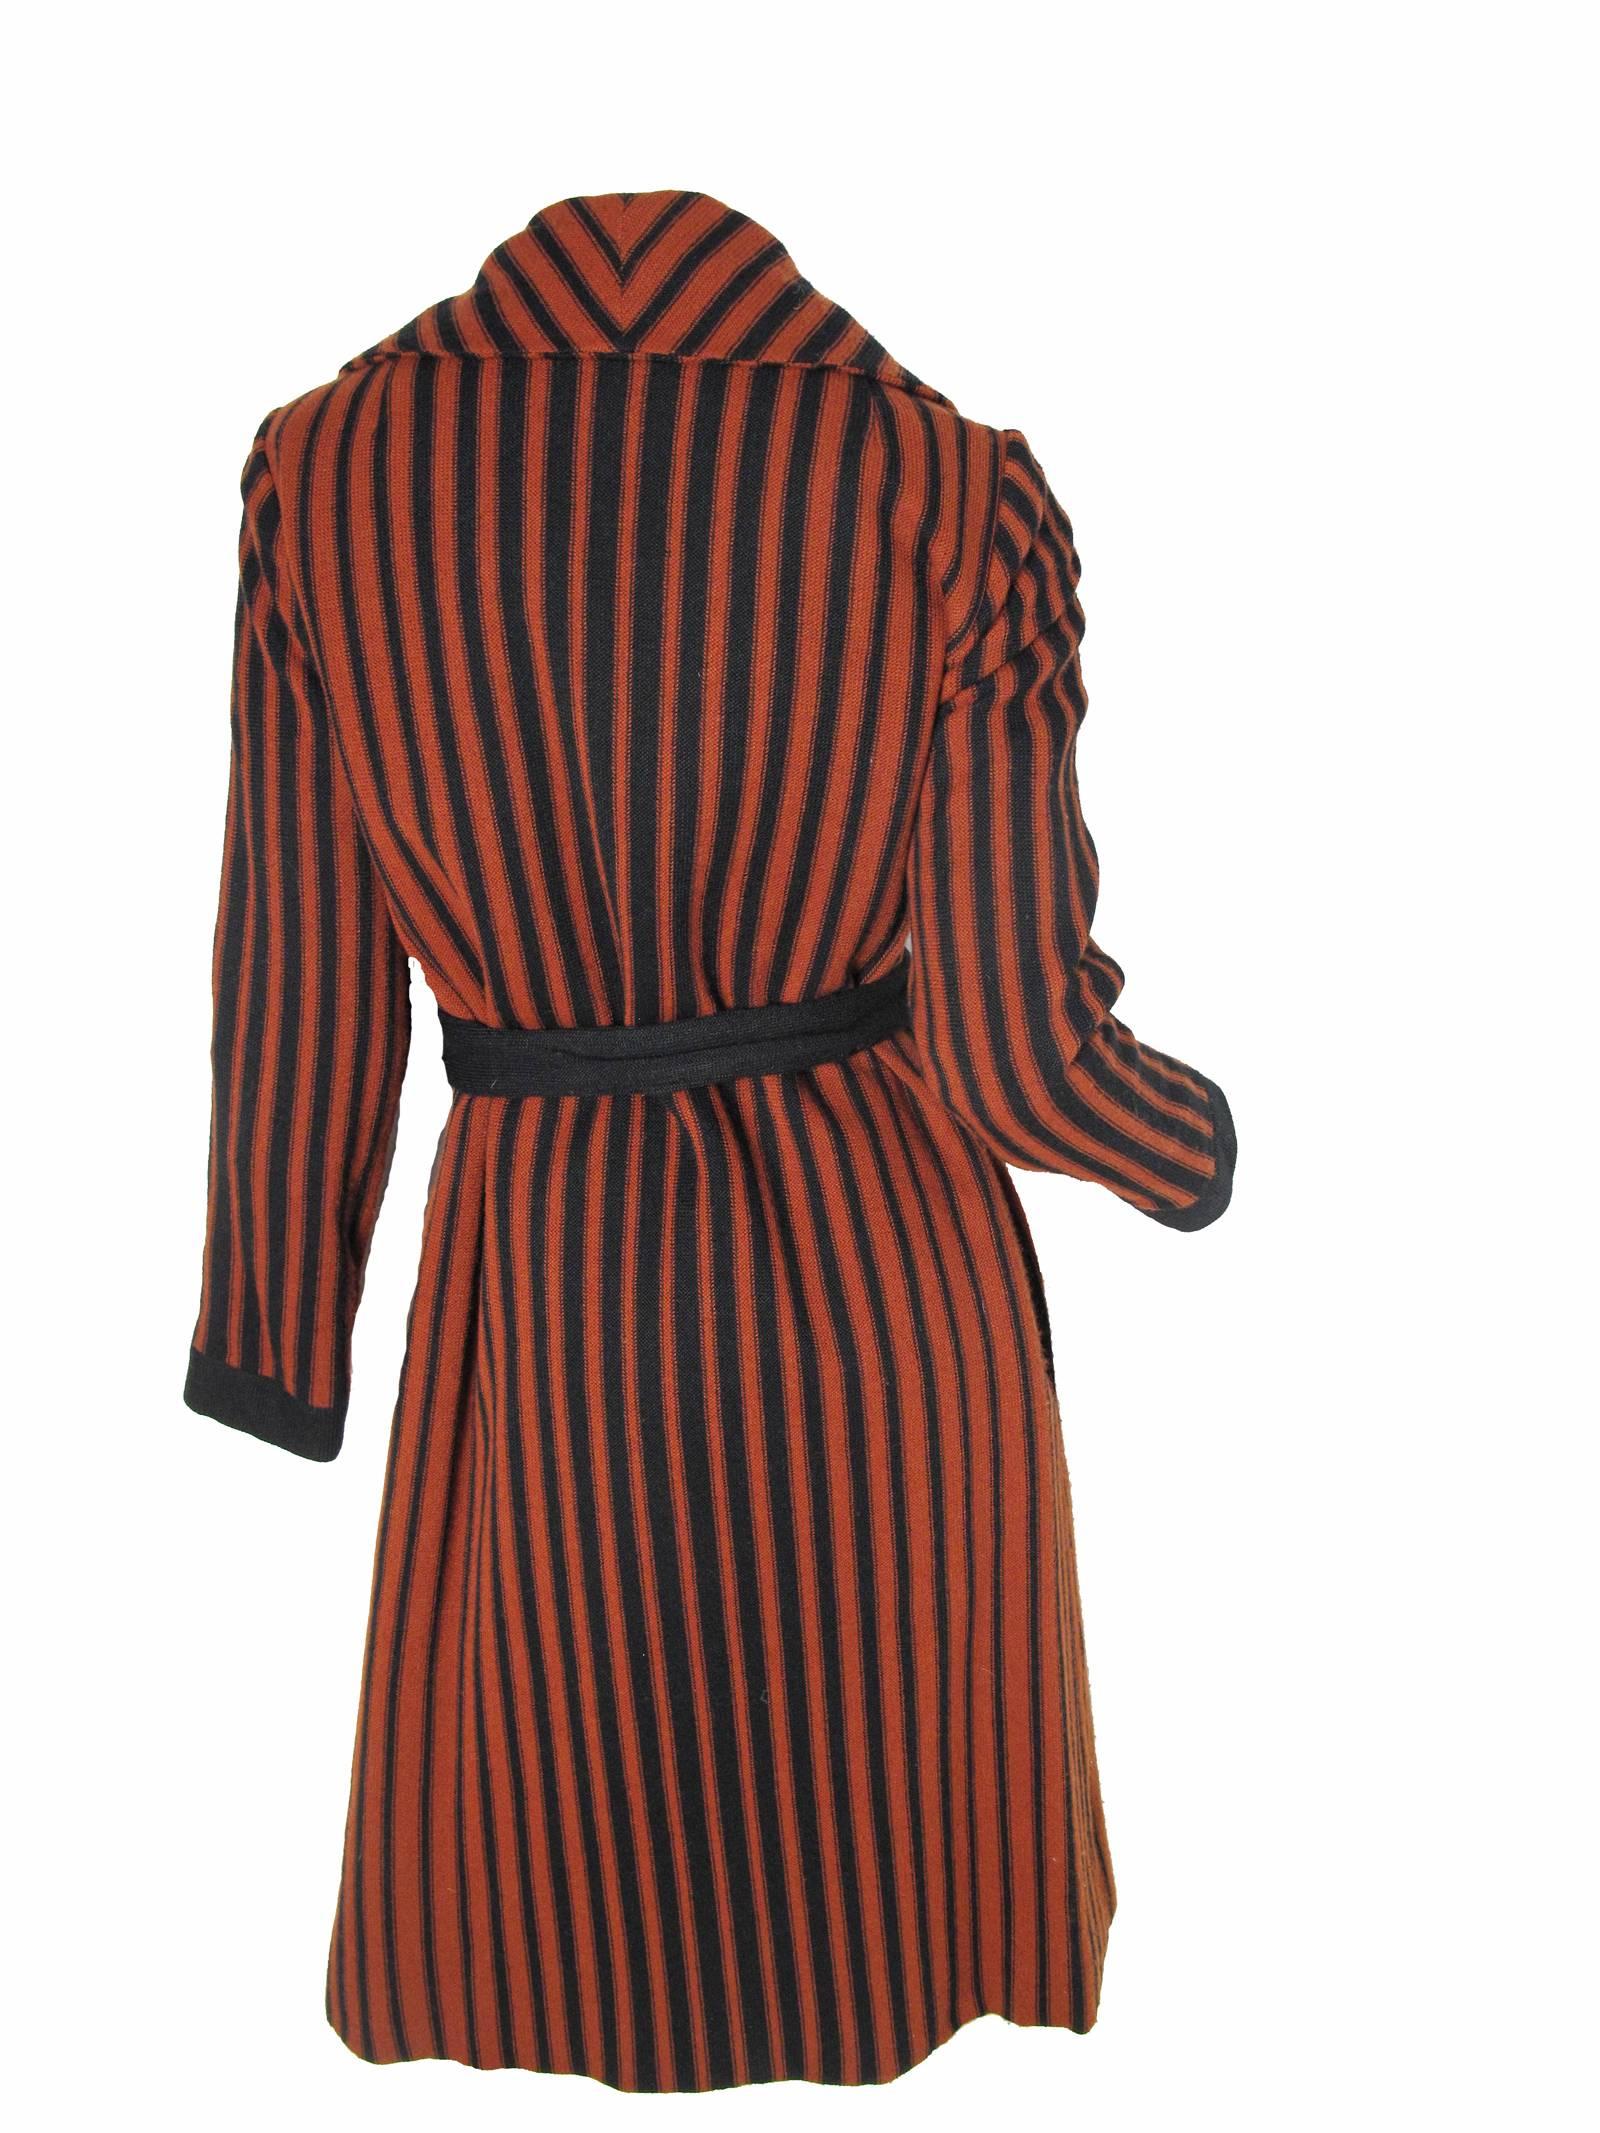 1970s Oscar de la Renat rust and black striped wool knit wrap coat.  Ties at waist.  Lined.  With side pockets. Condition: Very good vintage condition.  Size Medium

Measurements ( approximately )
36" bust
34" waist
41" hips
23